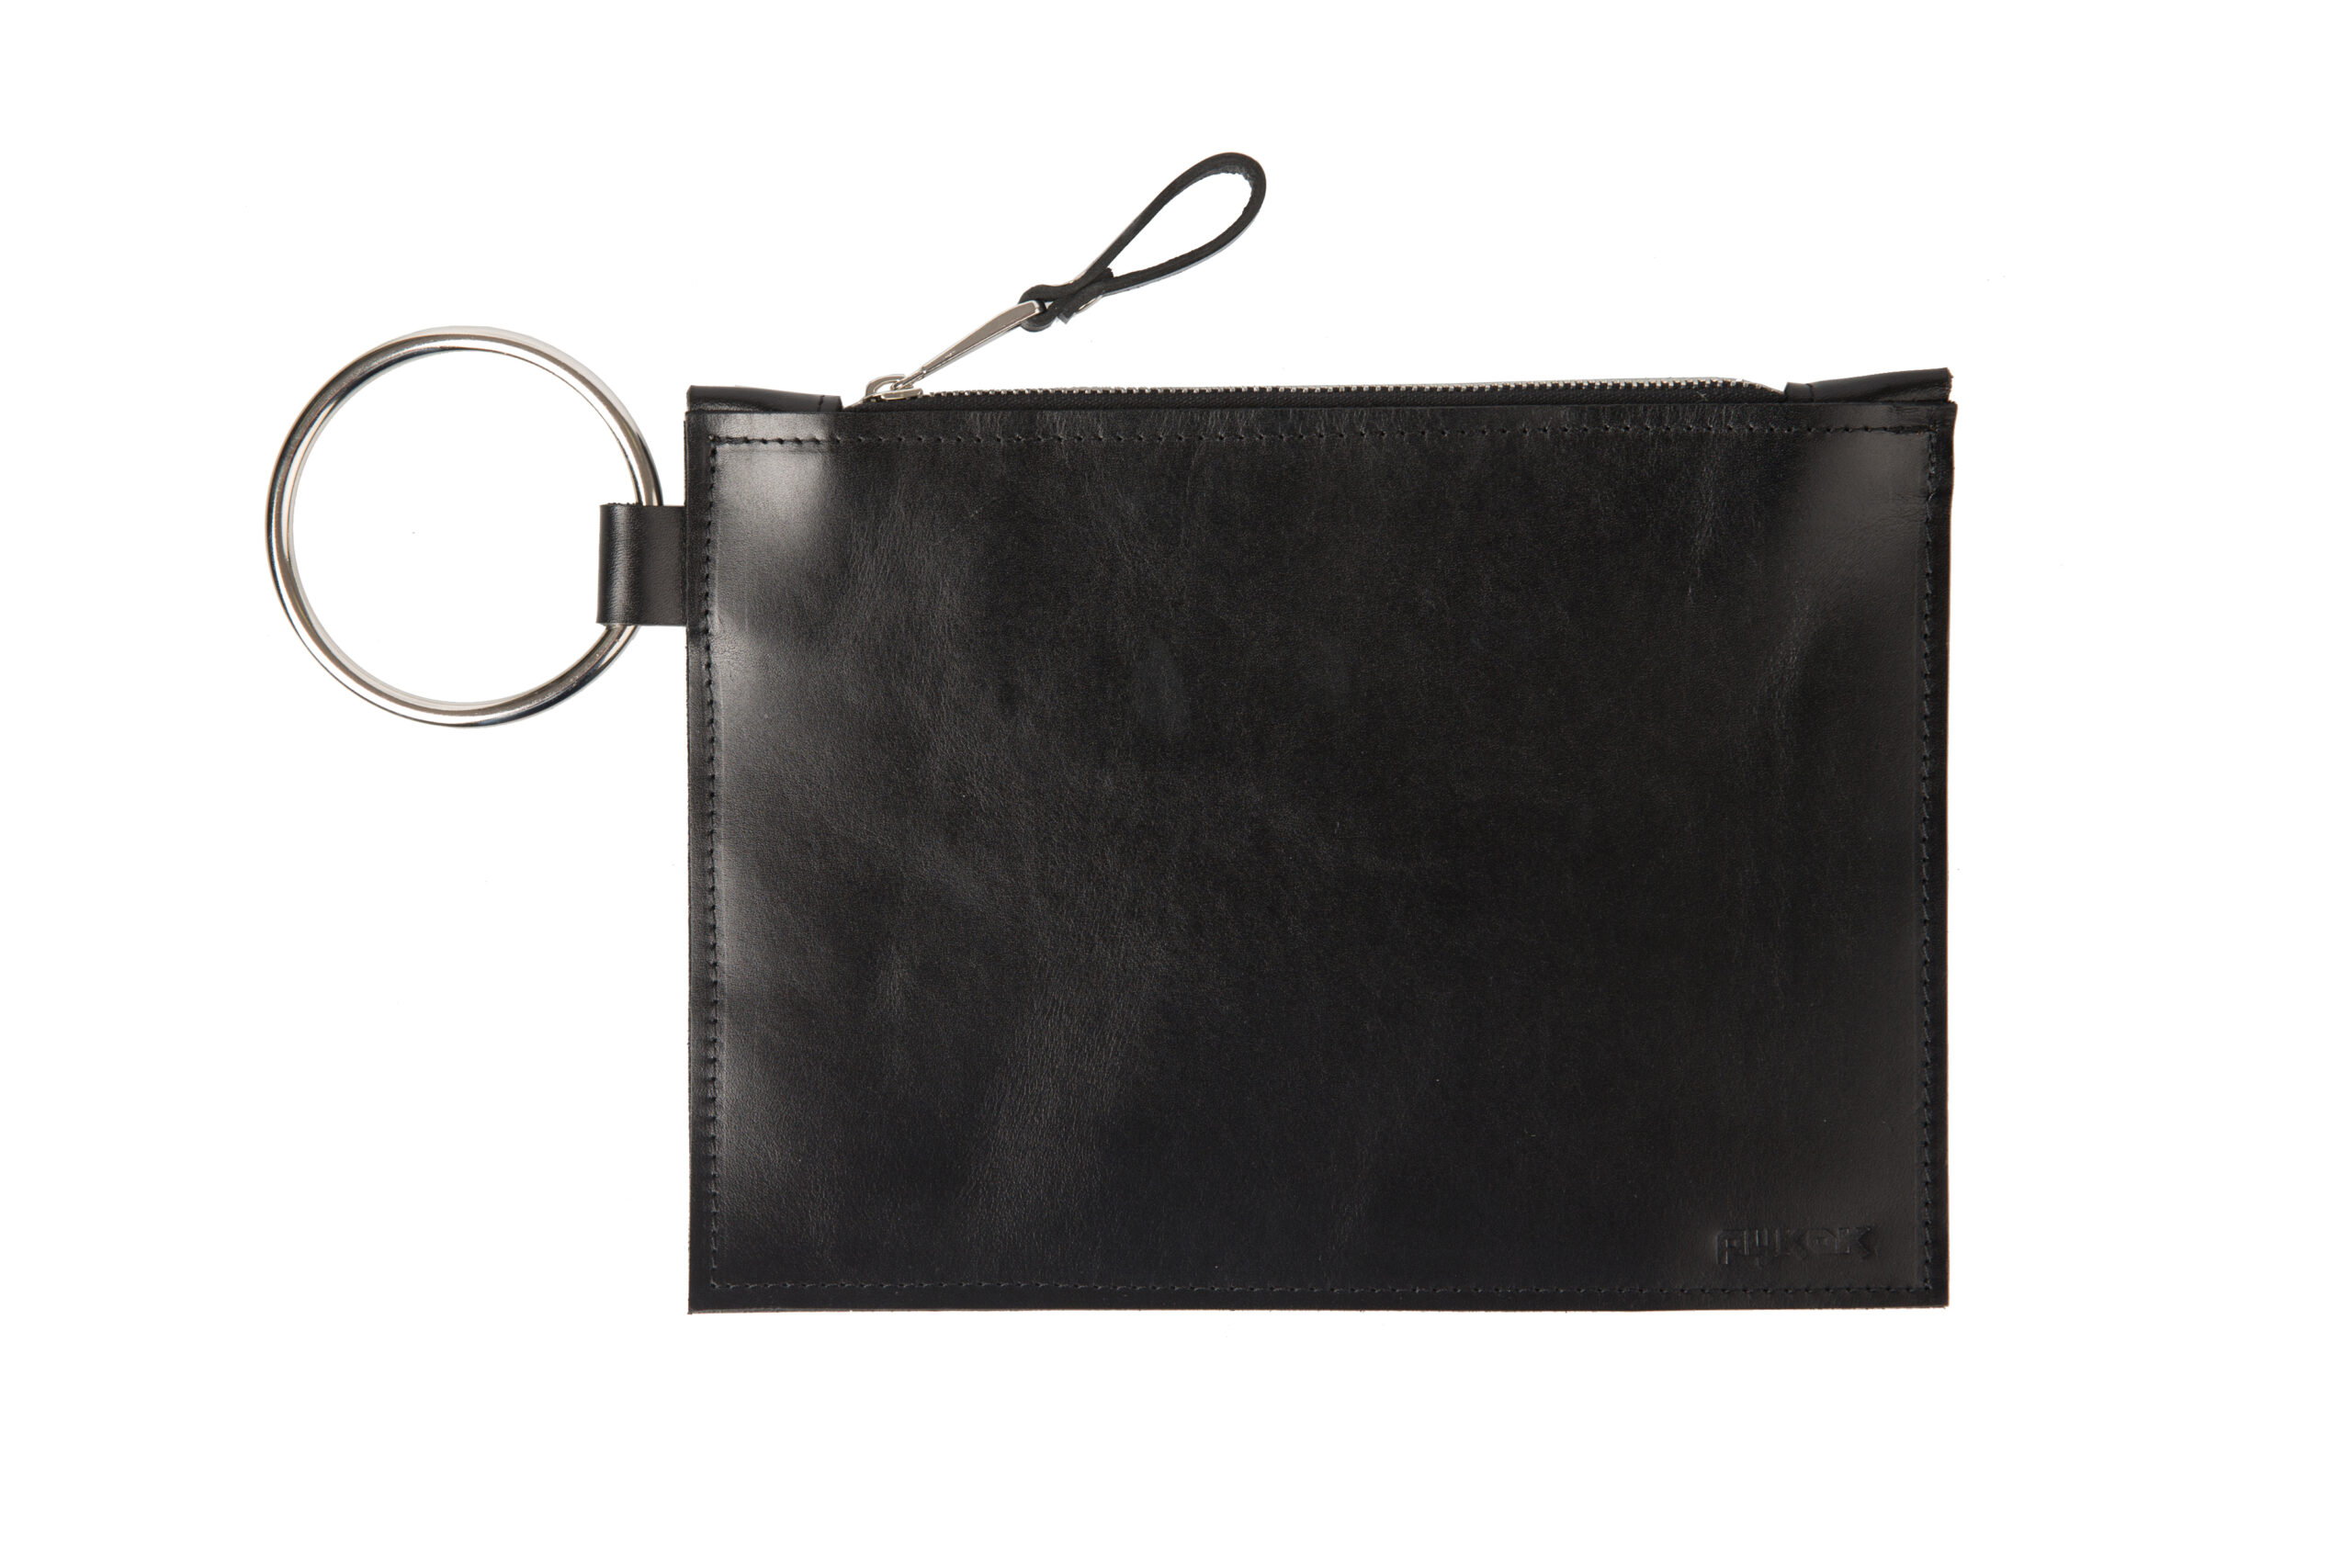 Clutch Nina With a Ring Handle | Hertwill